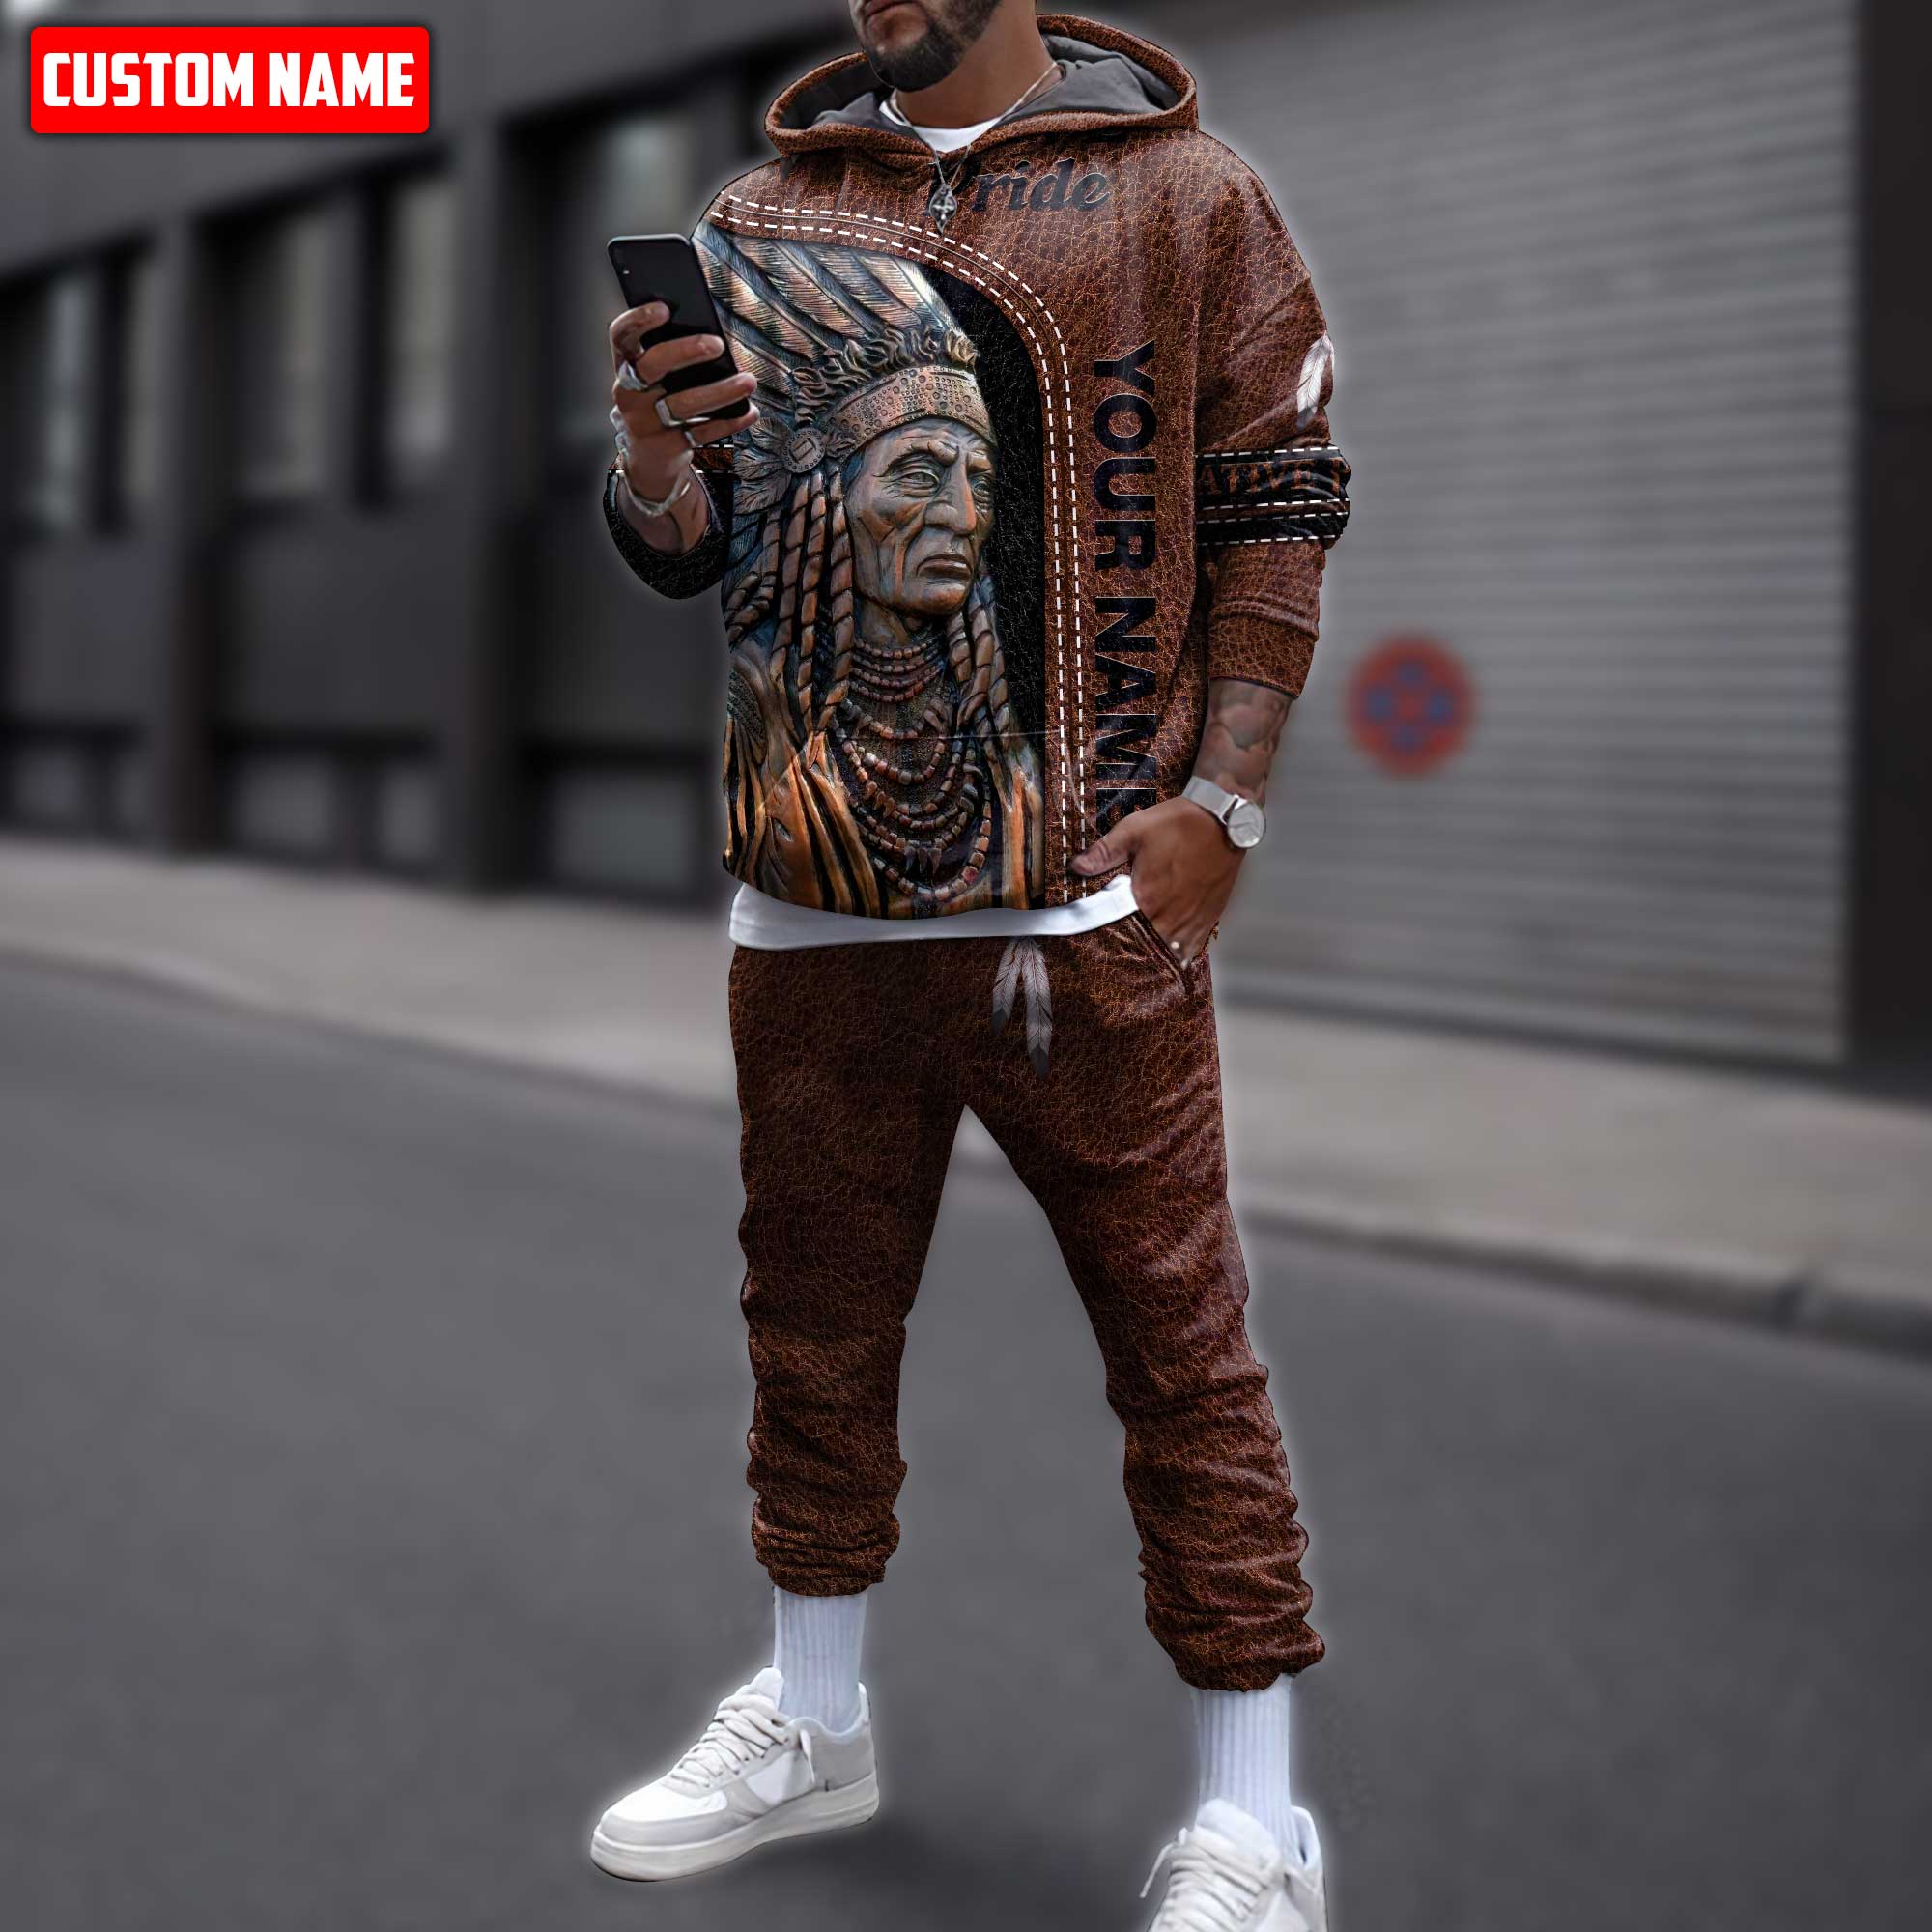 Customize Name Native American 3D All Over Printed Combo Hoodie + Sweatpant